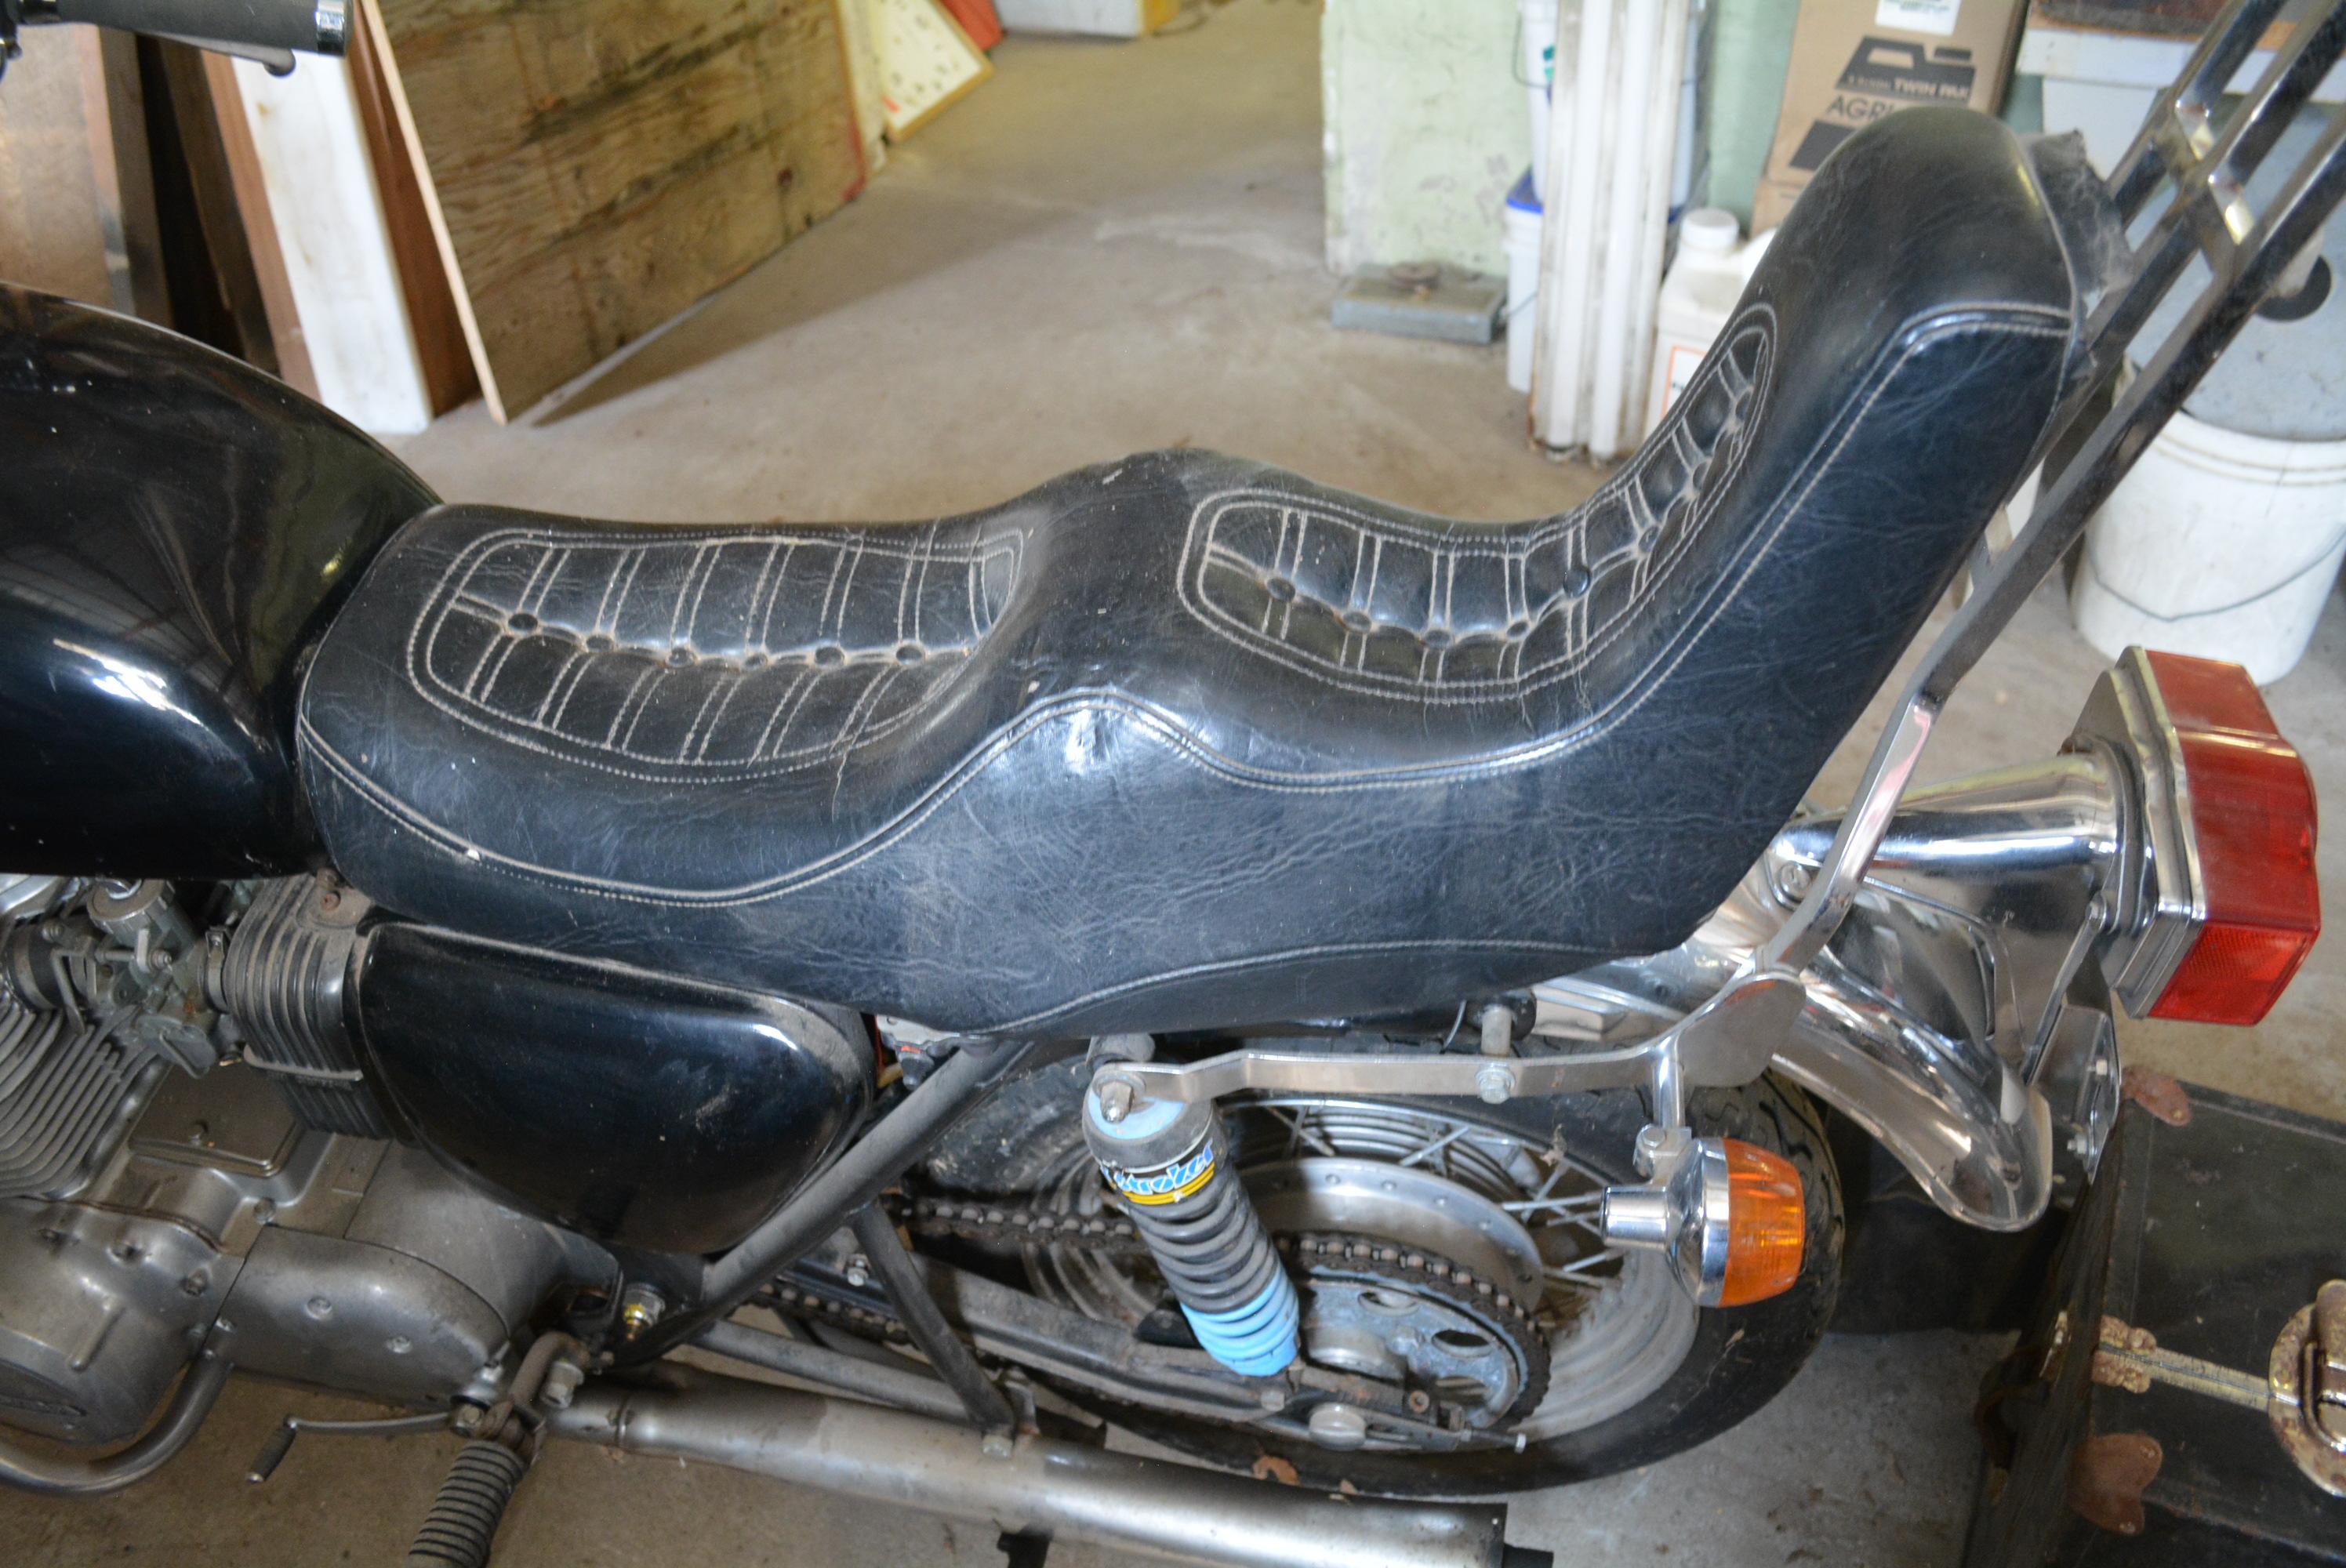 1974 Honda Motorcycle, 2-seater with high cushioned back rest for passenger,